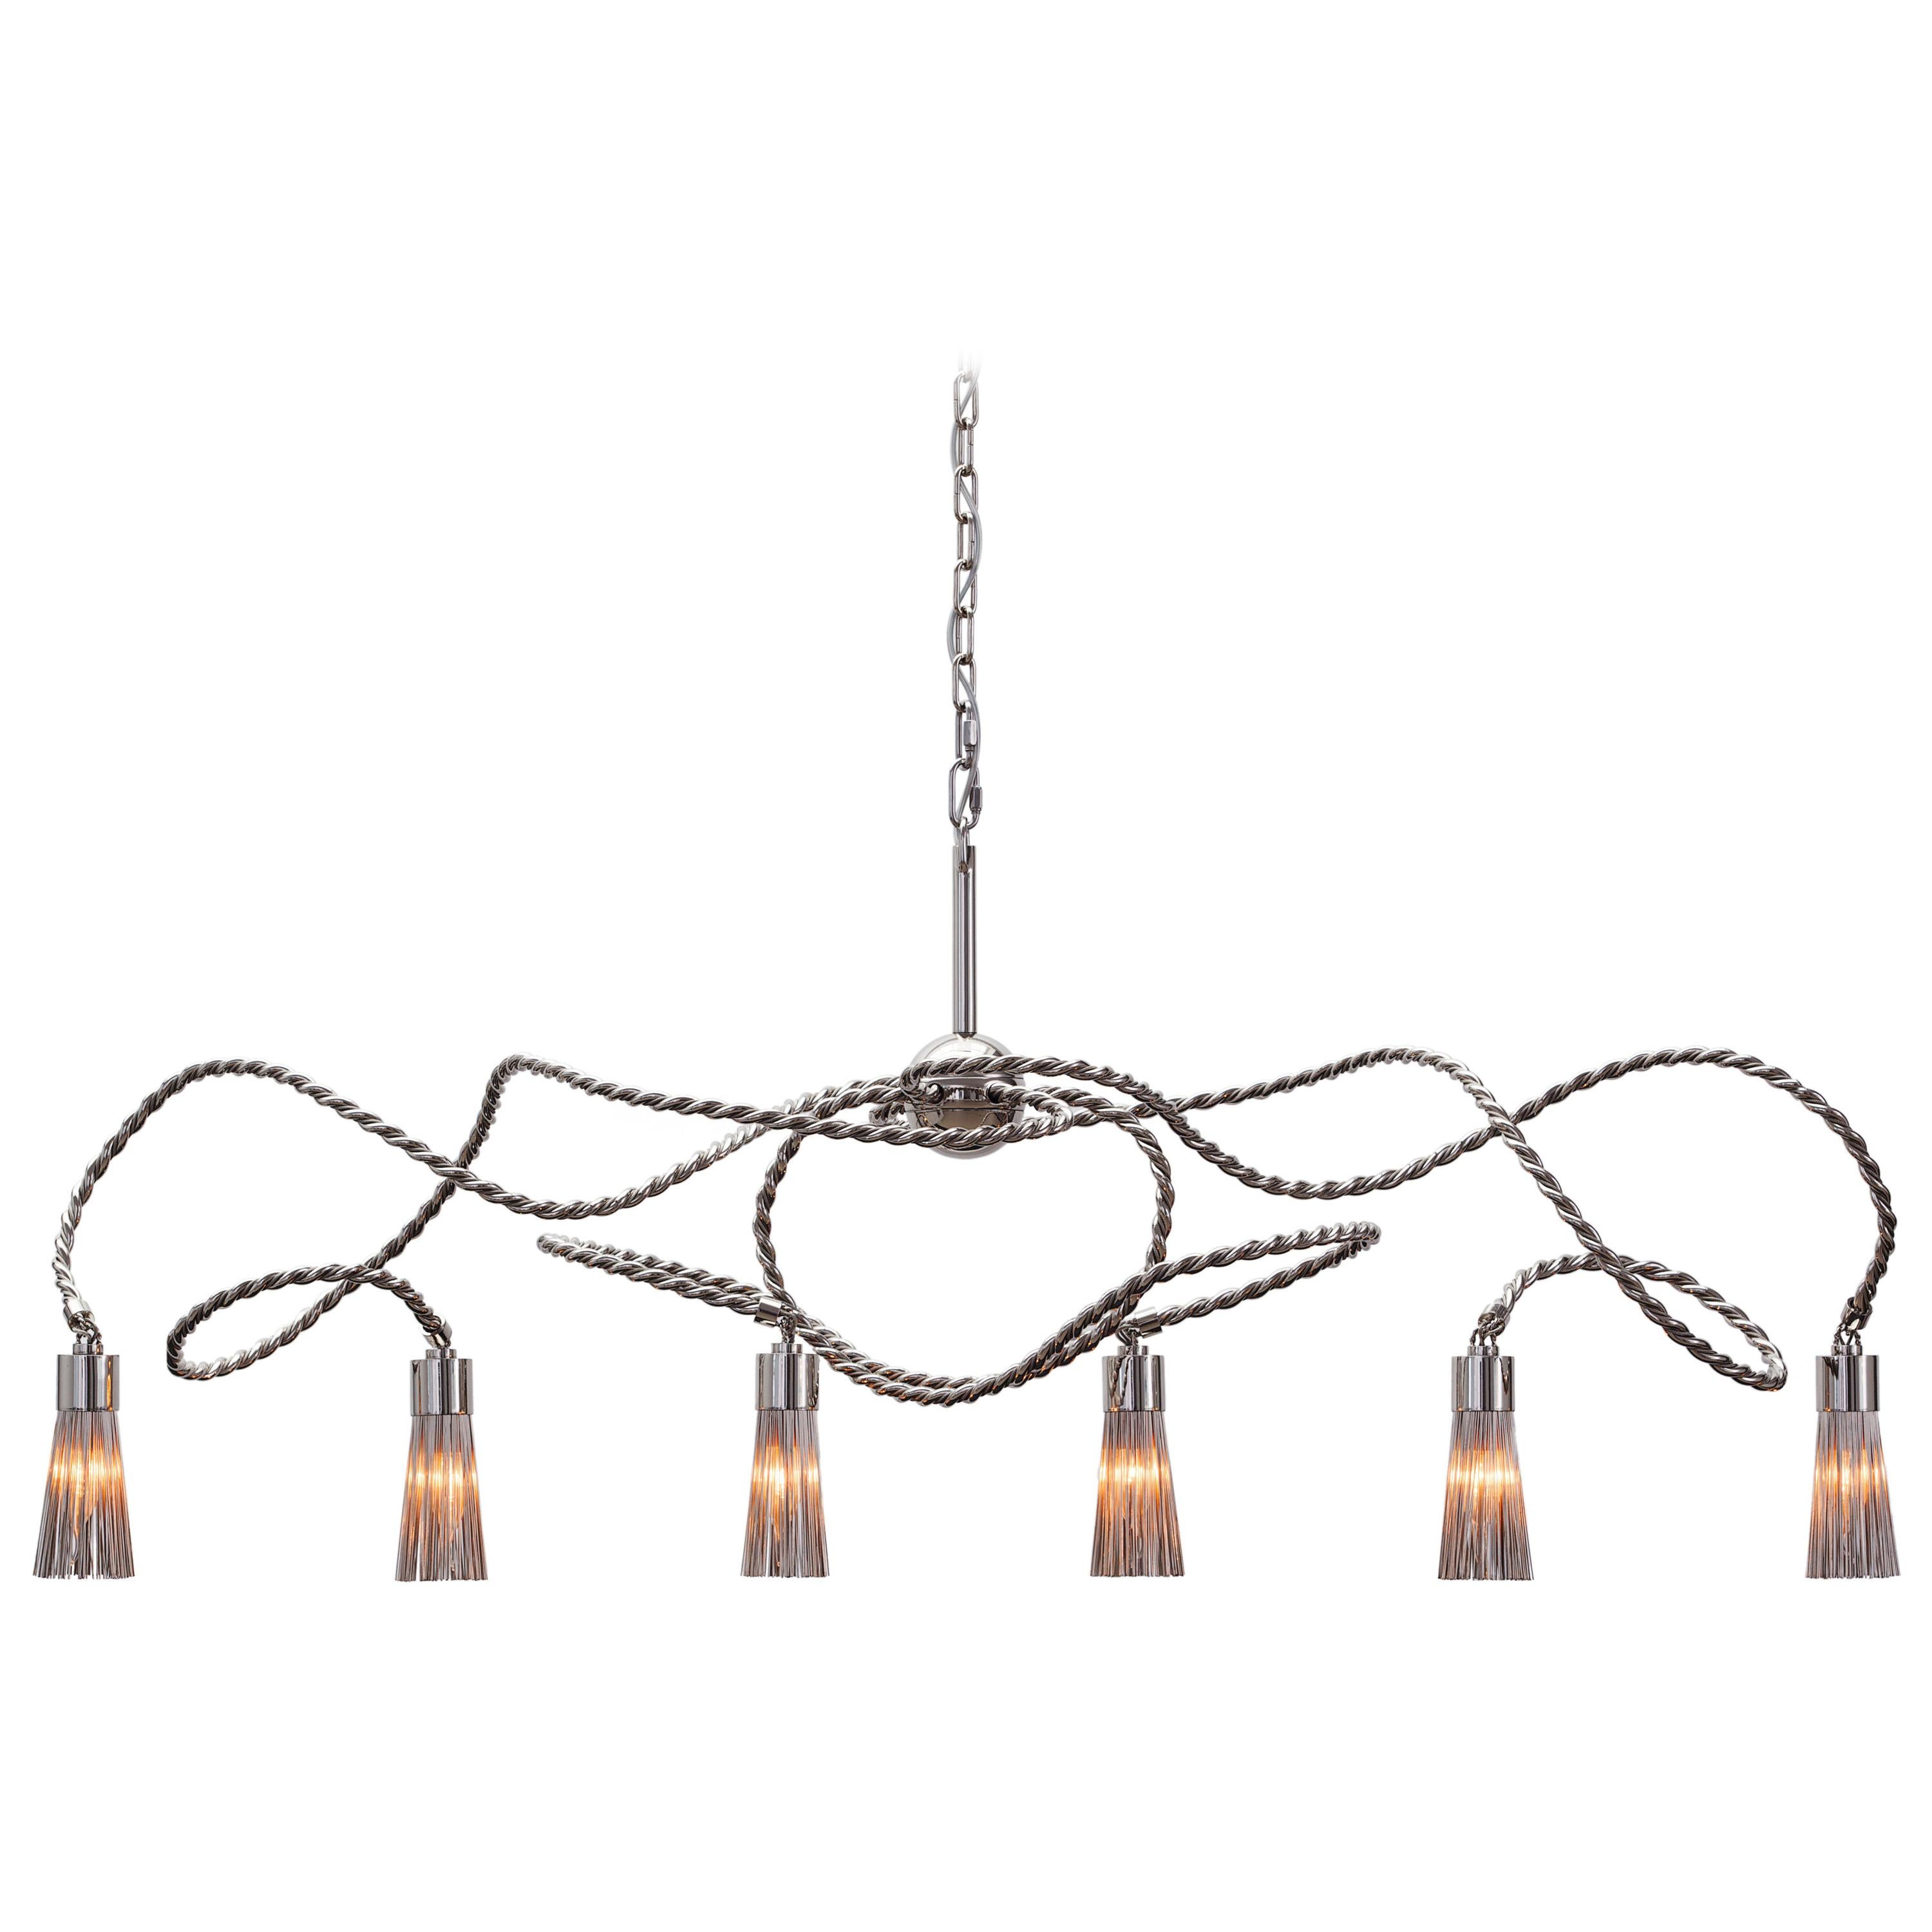 Modern Pendant in a Nickel Finish, Sultans of Swing Collection, by Brand Van